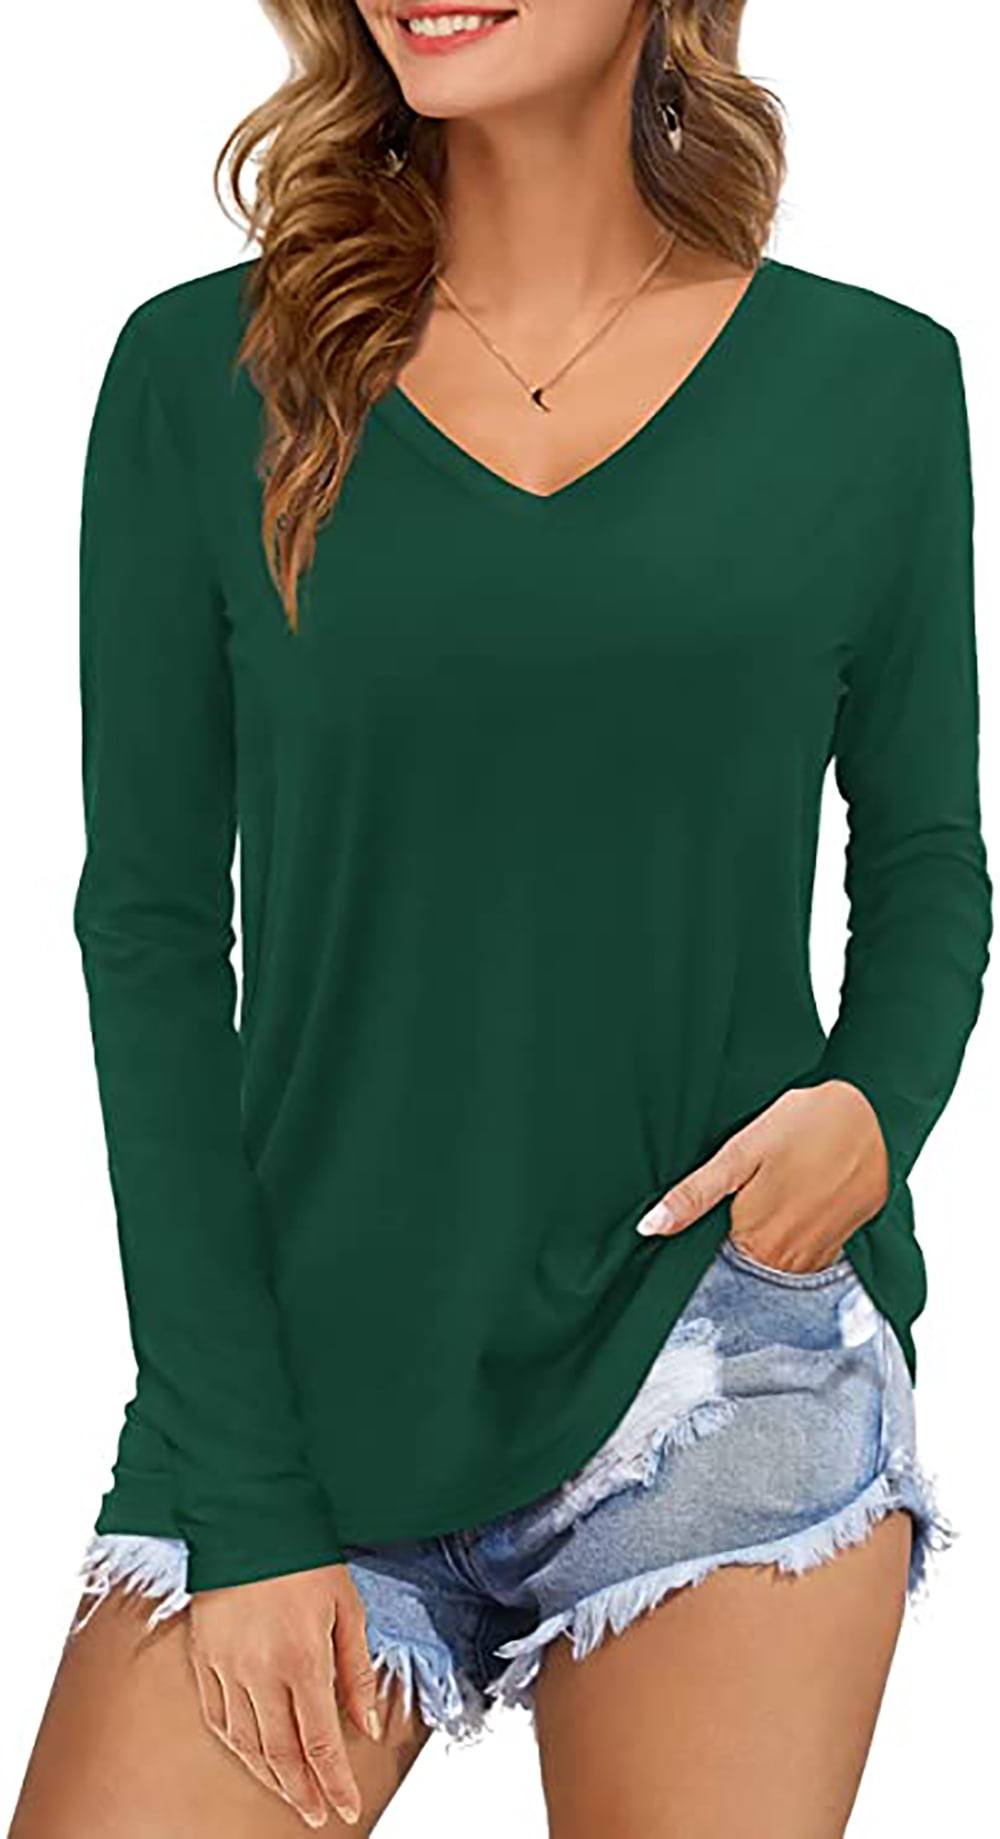 Fantaslook Long Sleeve Shirts for Women Casual V Neck Tops Tee Solid ...